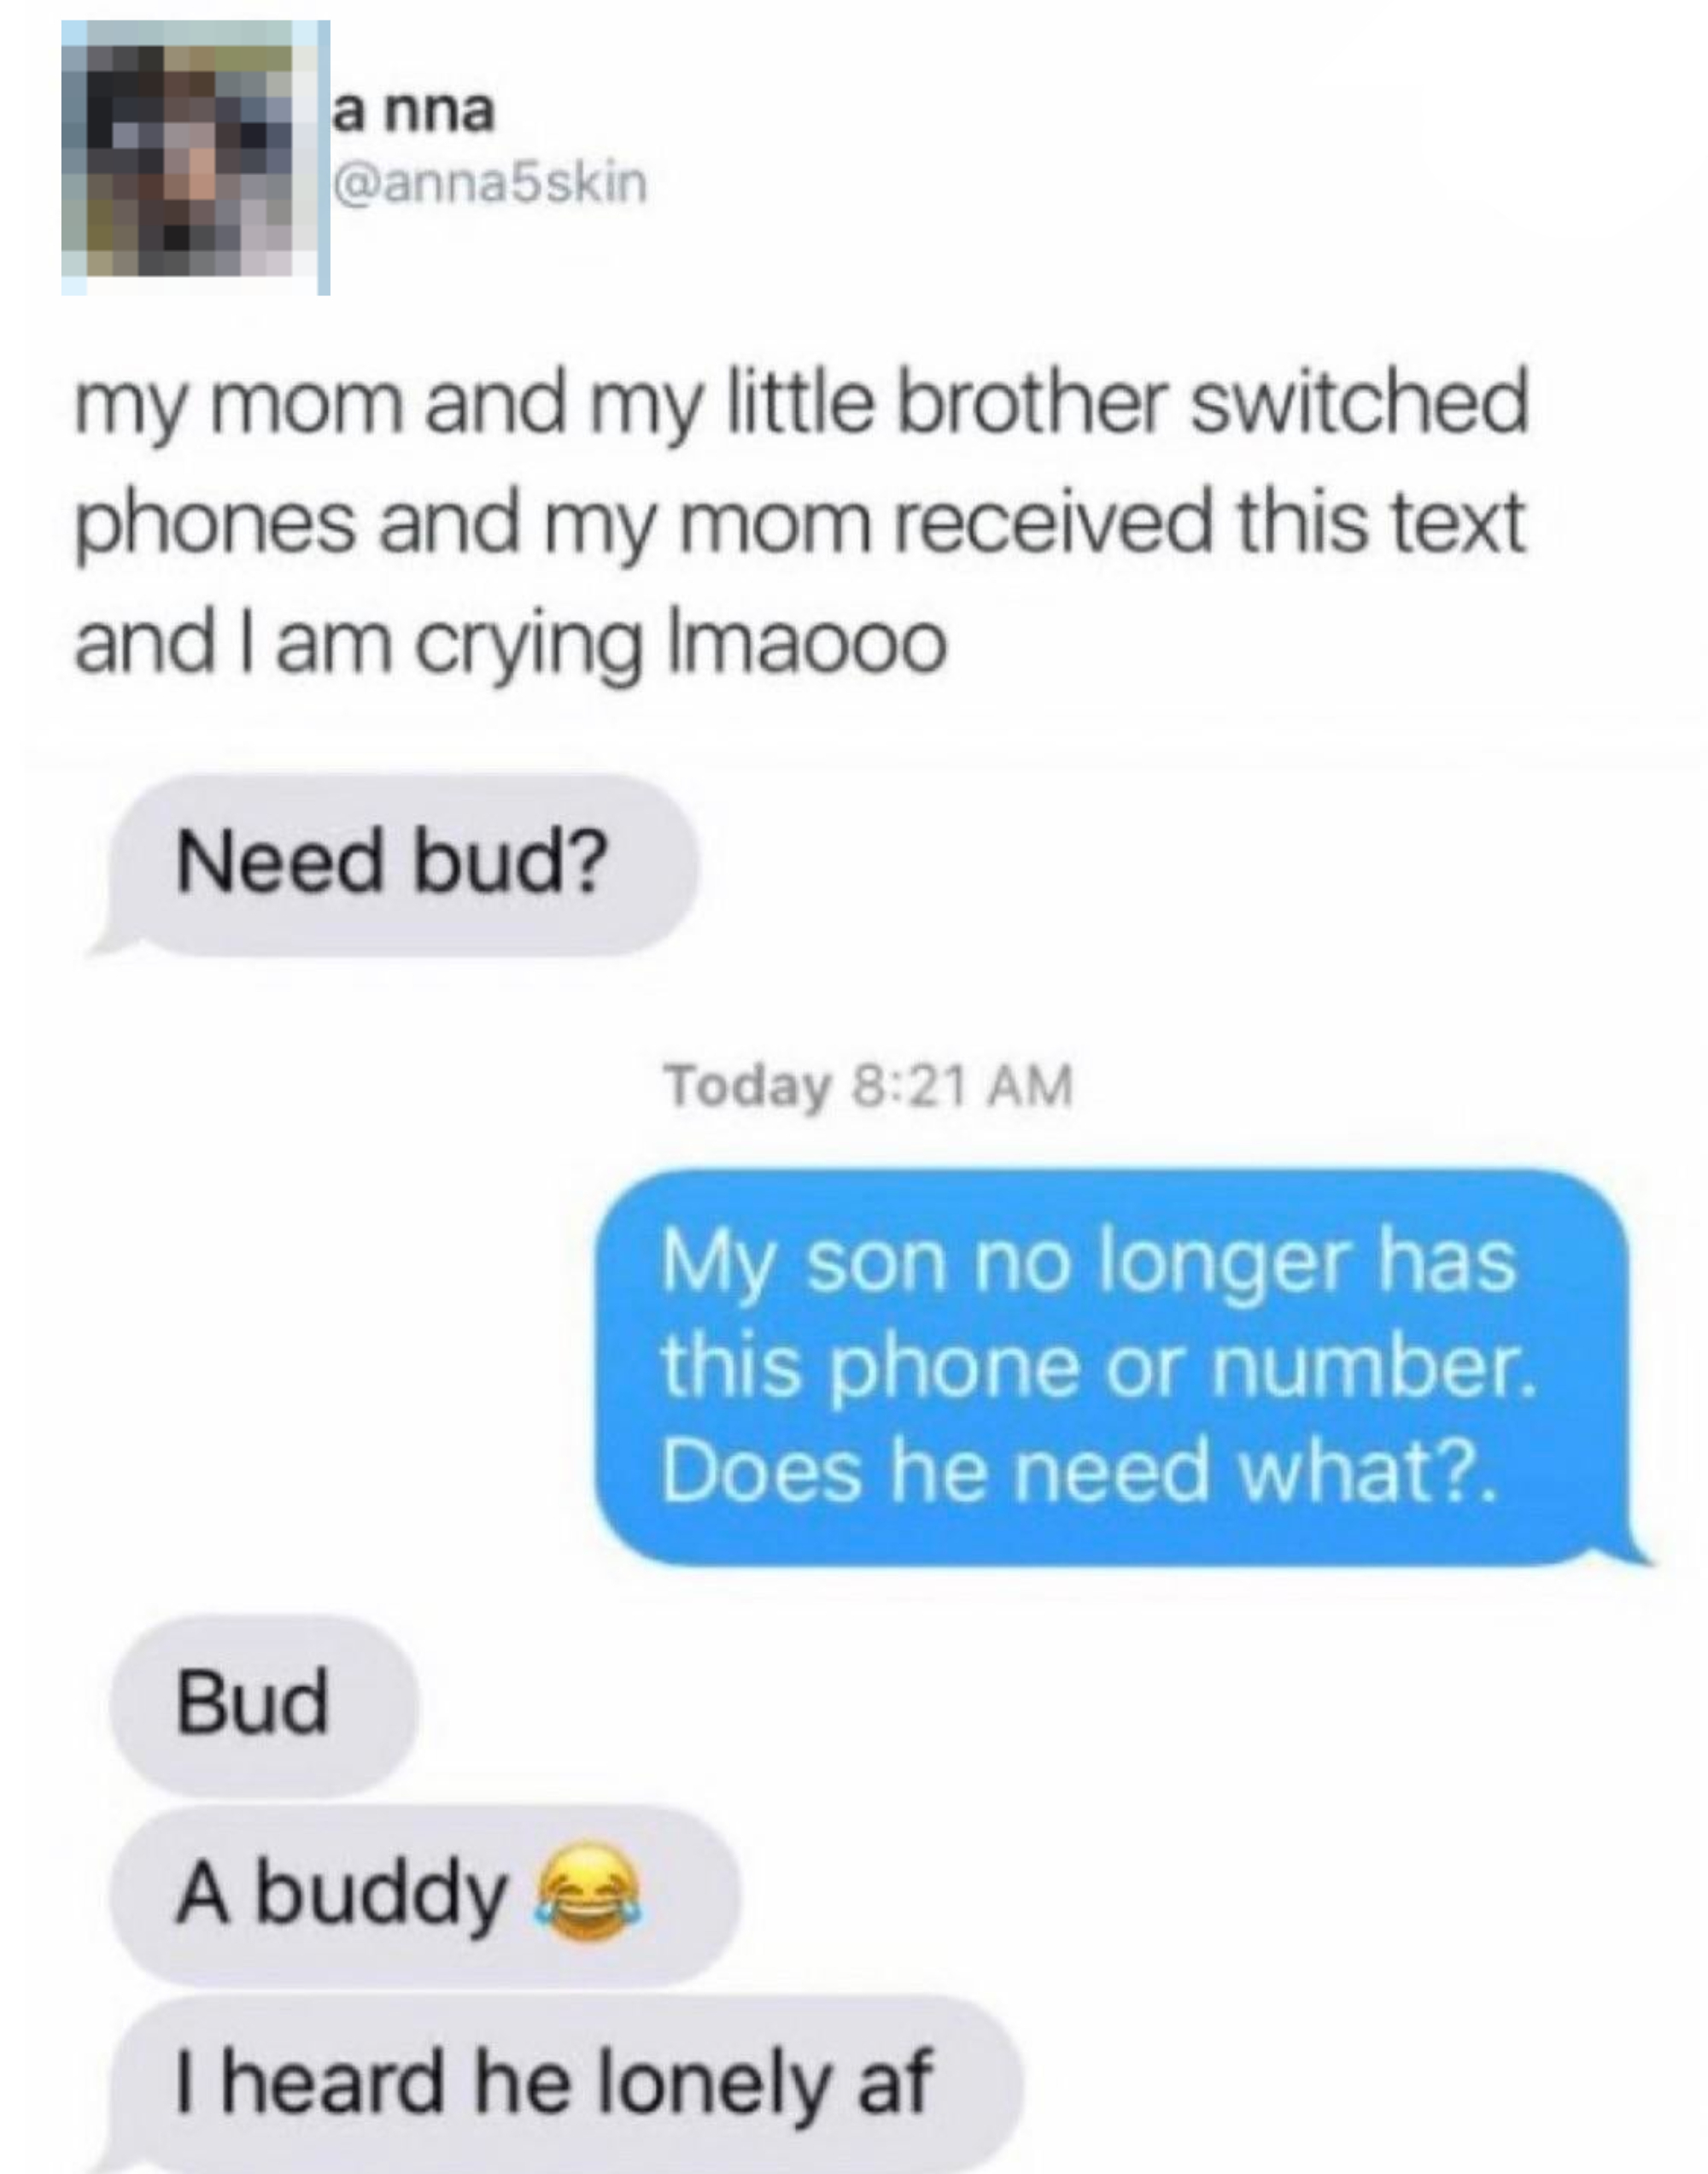 Screen capture of a humorous text exchange where someone offers &#x27;bud&#x27; and receives a confused response from a parent